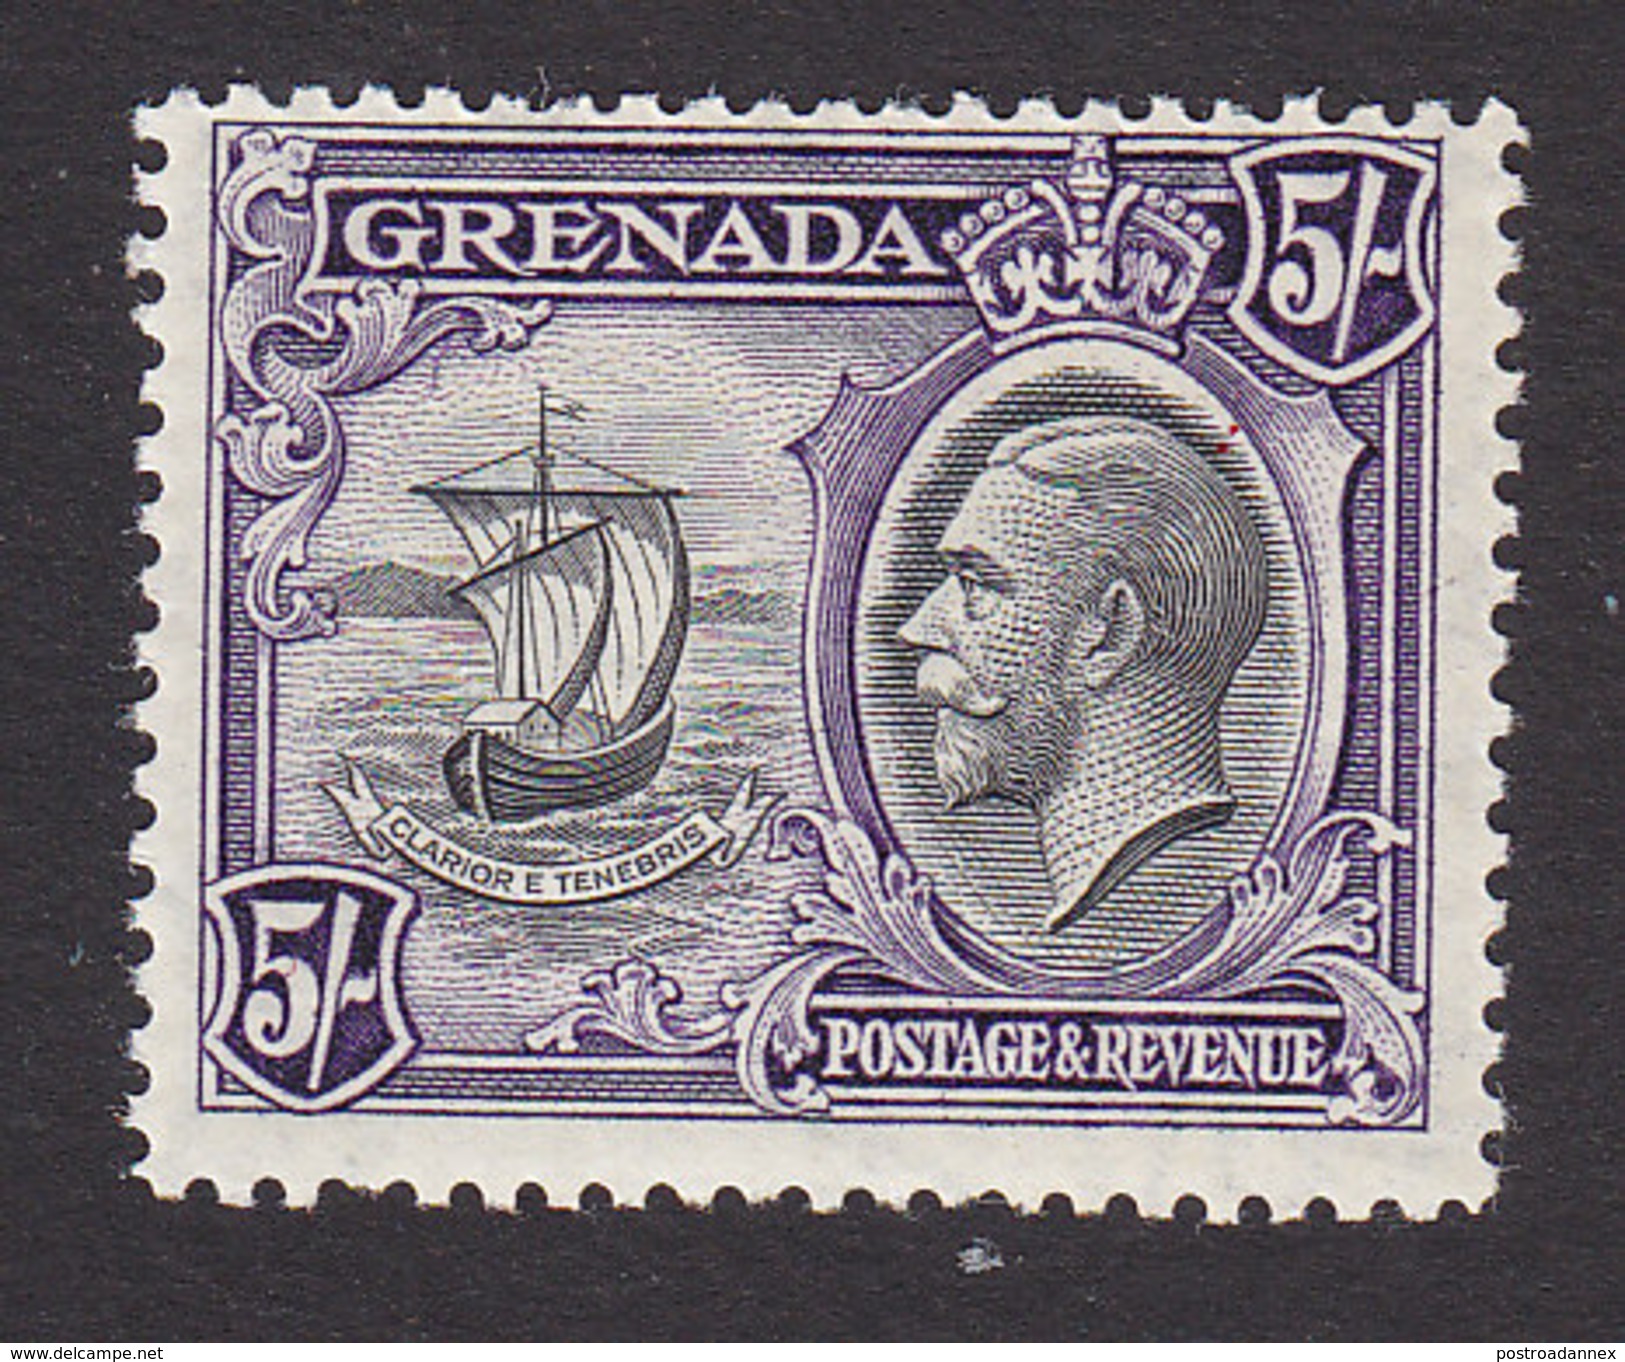 Grenada, Scott #123, Mint Hinged, Seal Of The Colony, Issued 1934 - Grenada (...-1974)